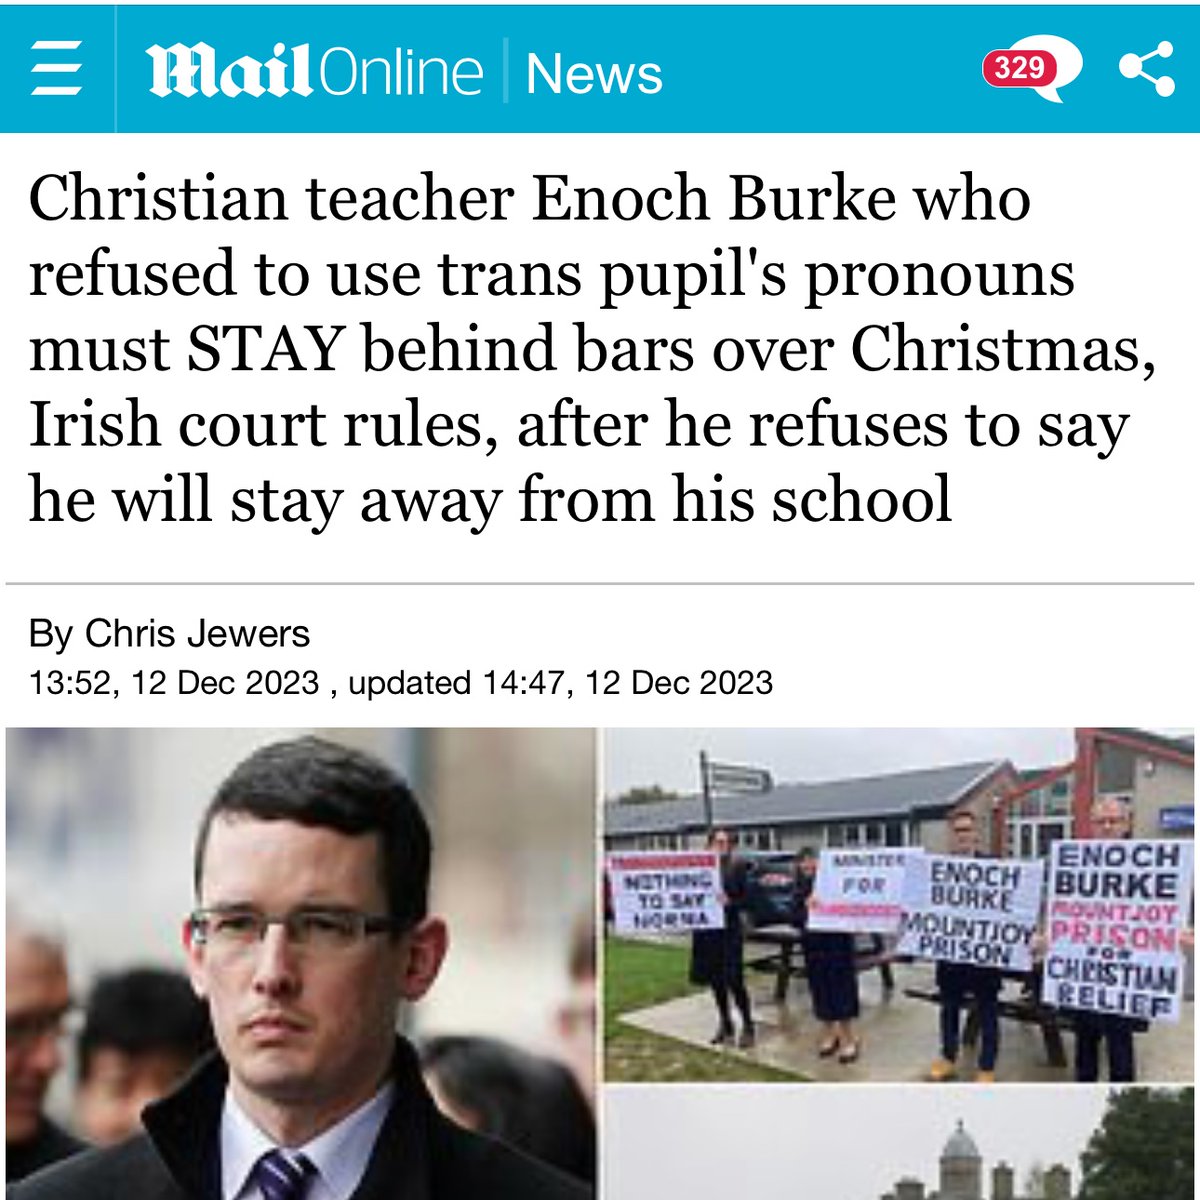 #christianTeacher #EnochBurke #transgender Can people not read??! How utterly embarrassing. This man was NOT arrested for refusing to say certain #pronouns You complete fucking idiots & embarrassment to the right #payattention You all are about as unhinged as the left these days